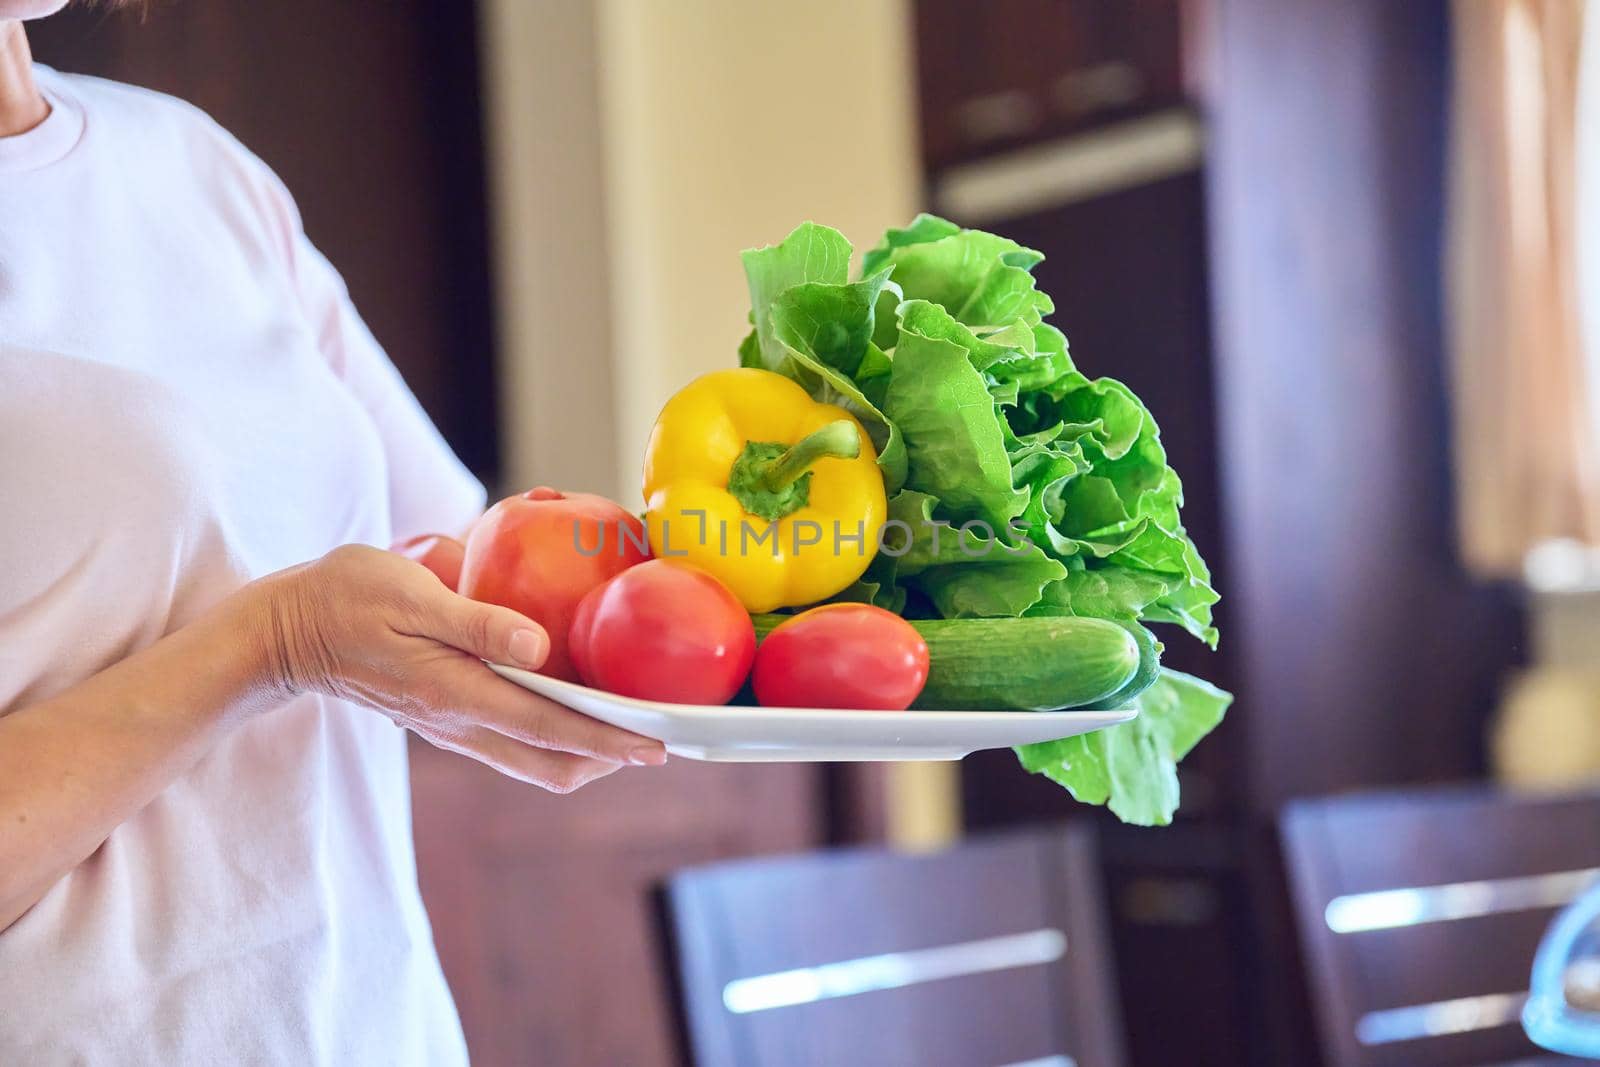 Close-up of a plate with tomatoes, cucumbers, paprika and lettuce in the hands of a woman. Kitchen interior background, fresh organic vegetables, home cooking, vegetarianism, nutrition, diet concept